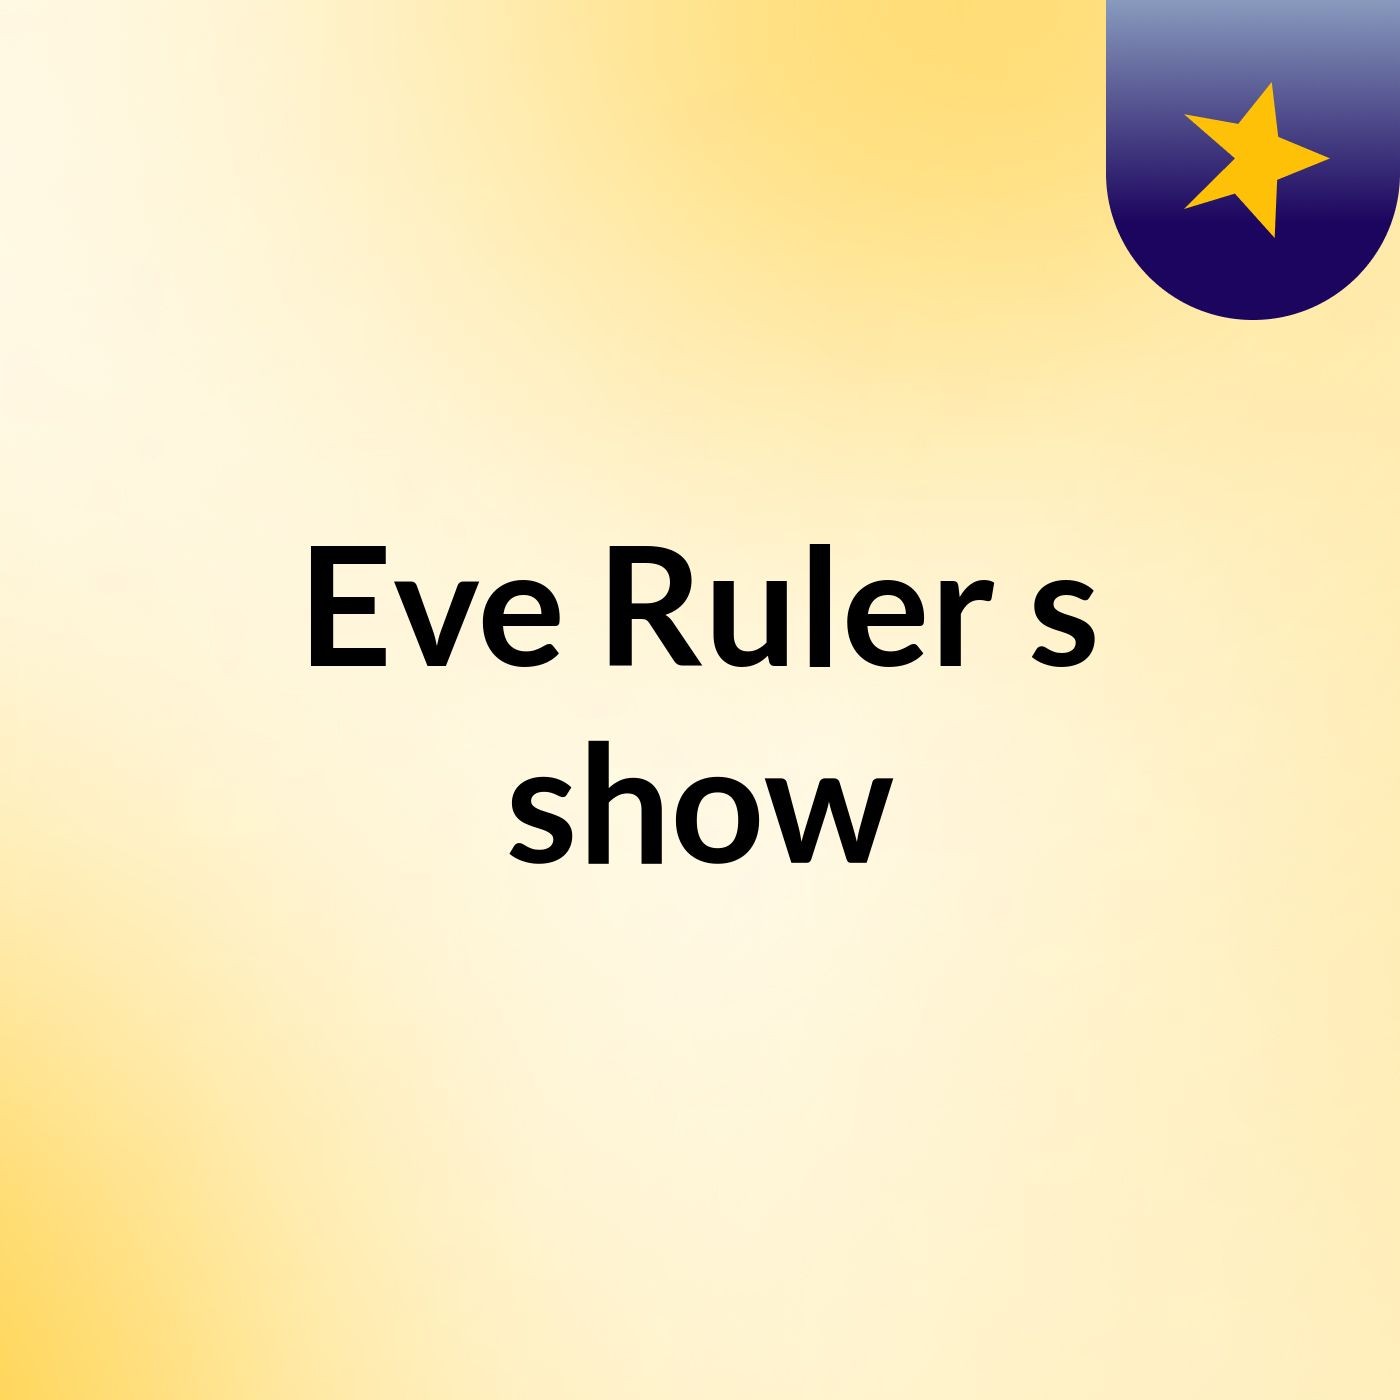 Eve Ruler's show